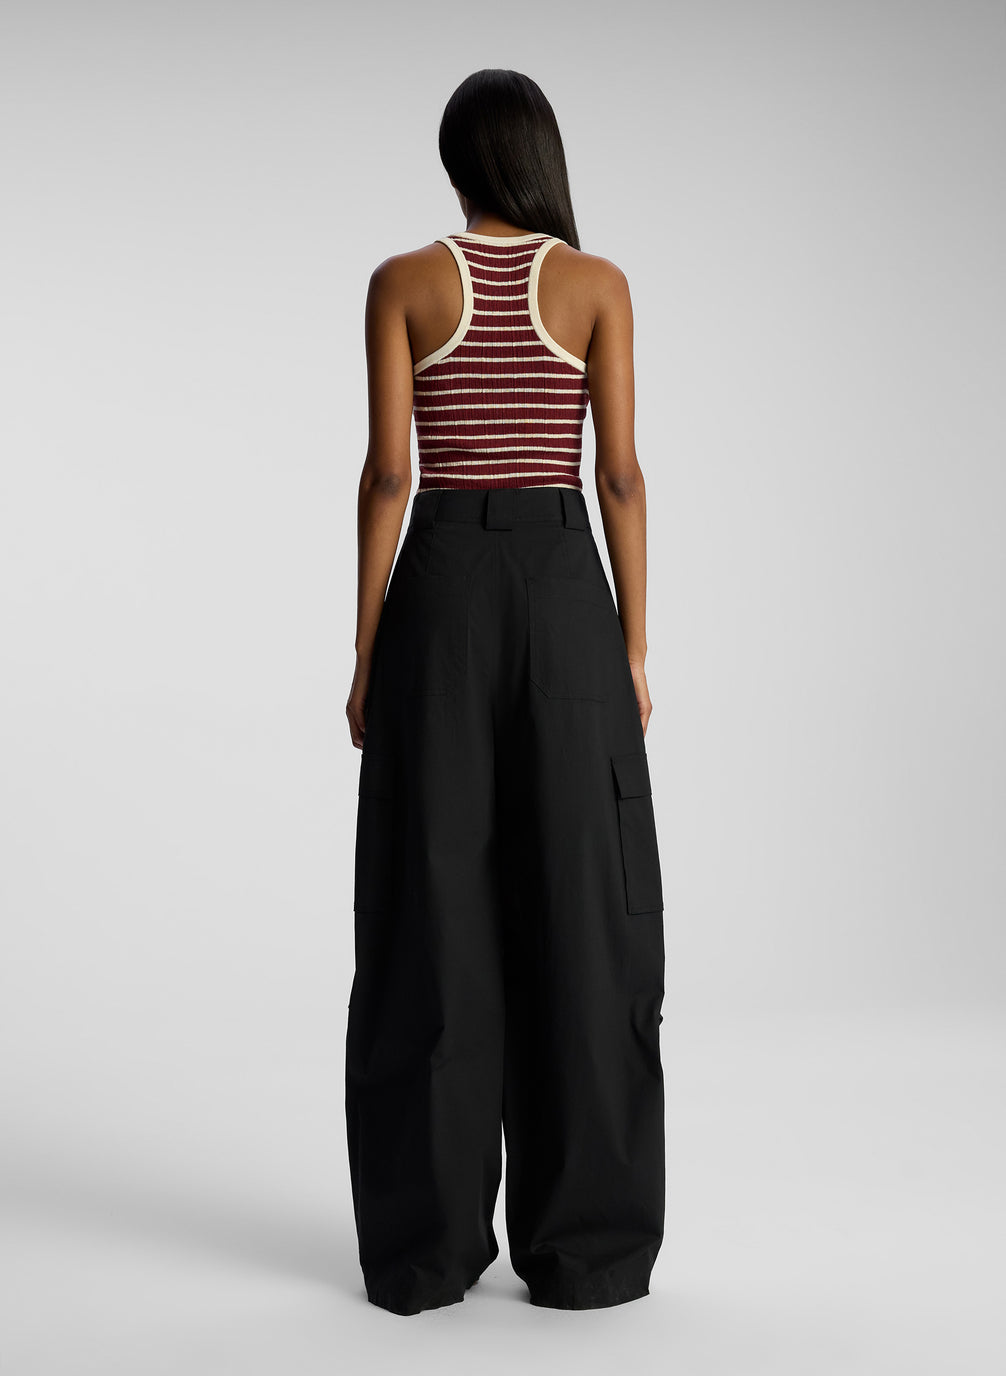 back view of woman wearing burgundy striped tank top and black cargo pants